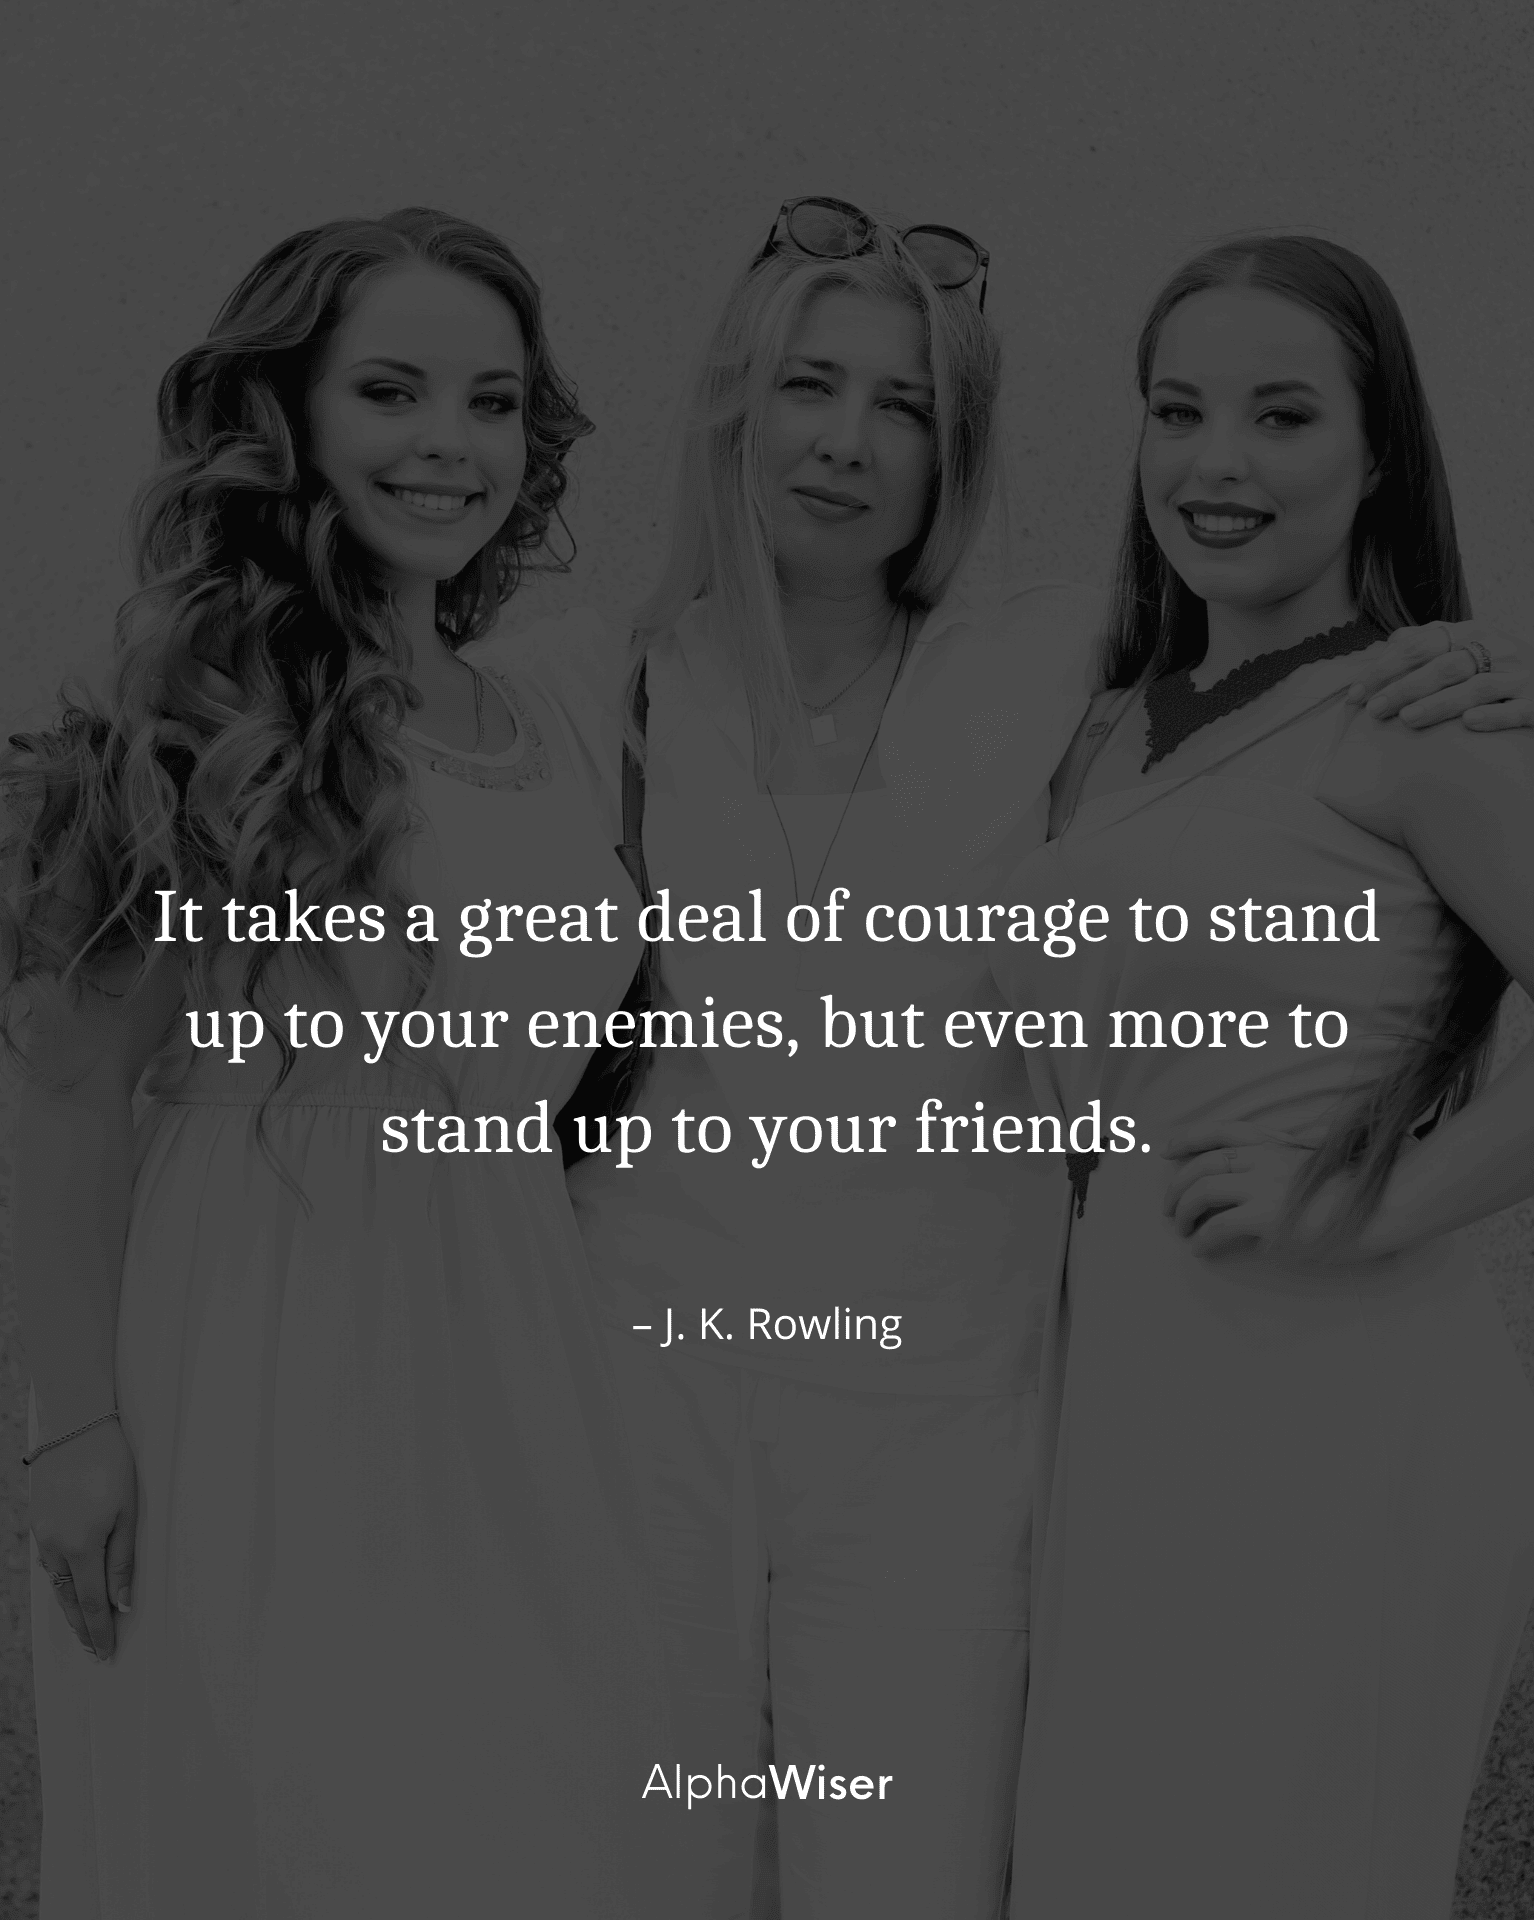 It takes a great deal of courage to stand up to your enemies, but even more to stand up to your friends.